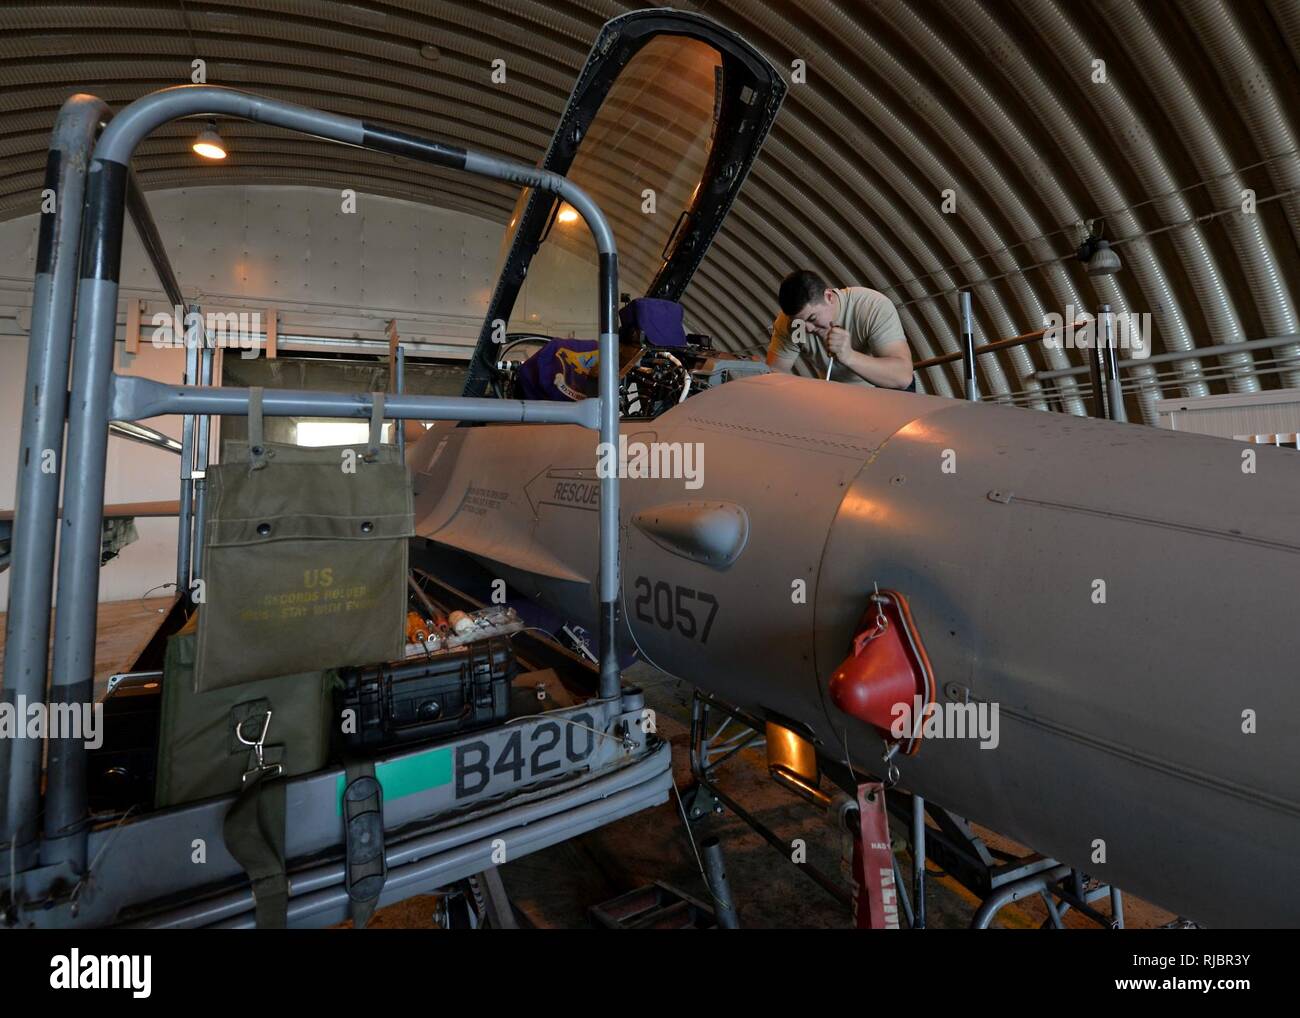 Senior Airman Chase Doering, 31st AMXS avionics systems journeyman, repairs an F-16 Fighting Falcon, Jan. 10, 2018, at Aviano Air Base, Italy. Doering repaired a switch which allows pilots to adjust auto-pilot settings. Stock Photo